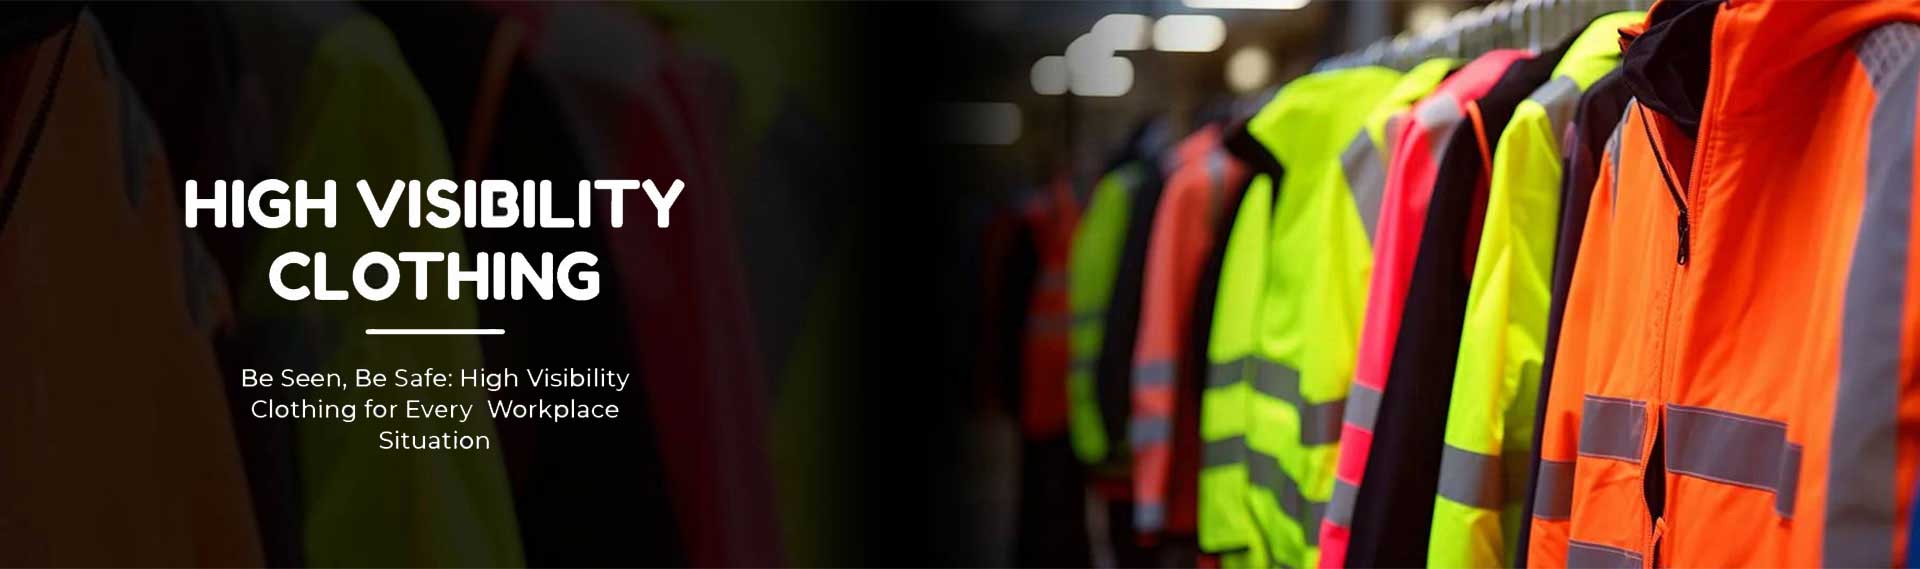 High Visibility Clothing Manufacturers in Vietnam